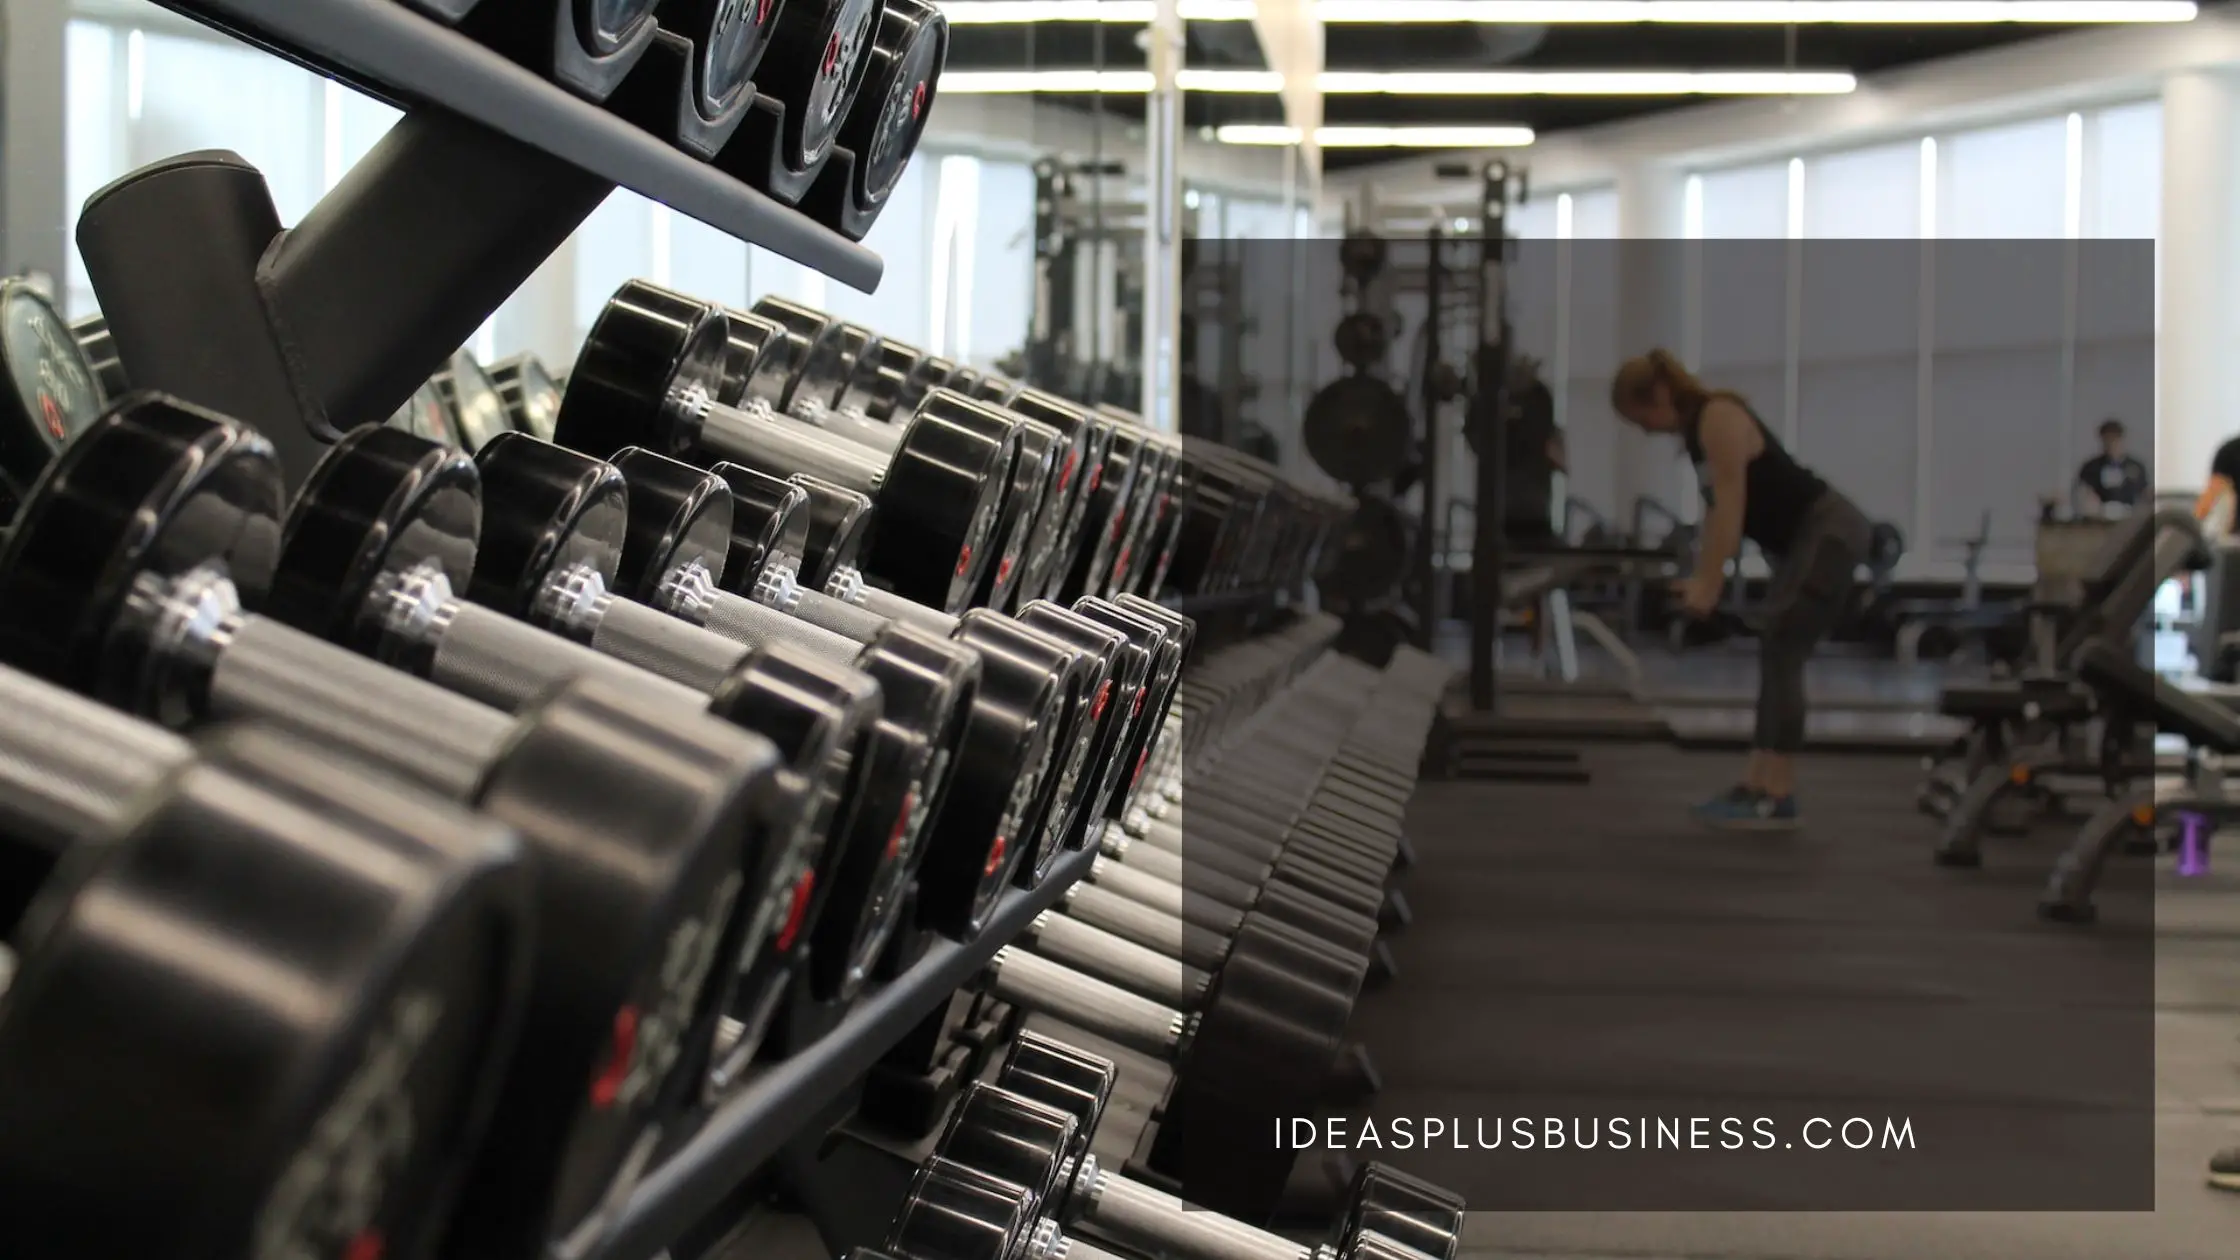 Best Gym Marketing Ideas to Attract More Clients